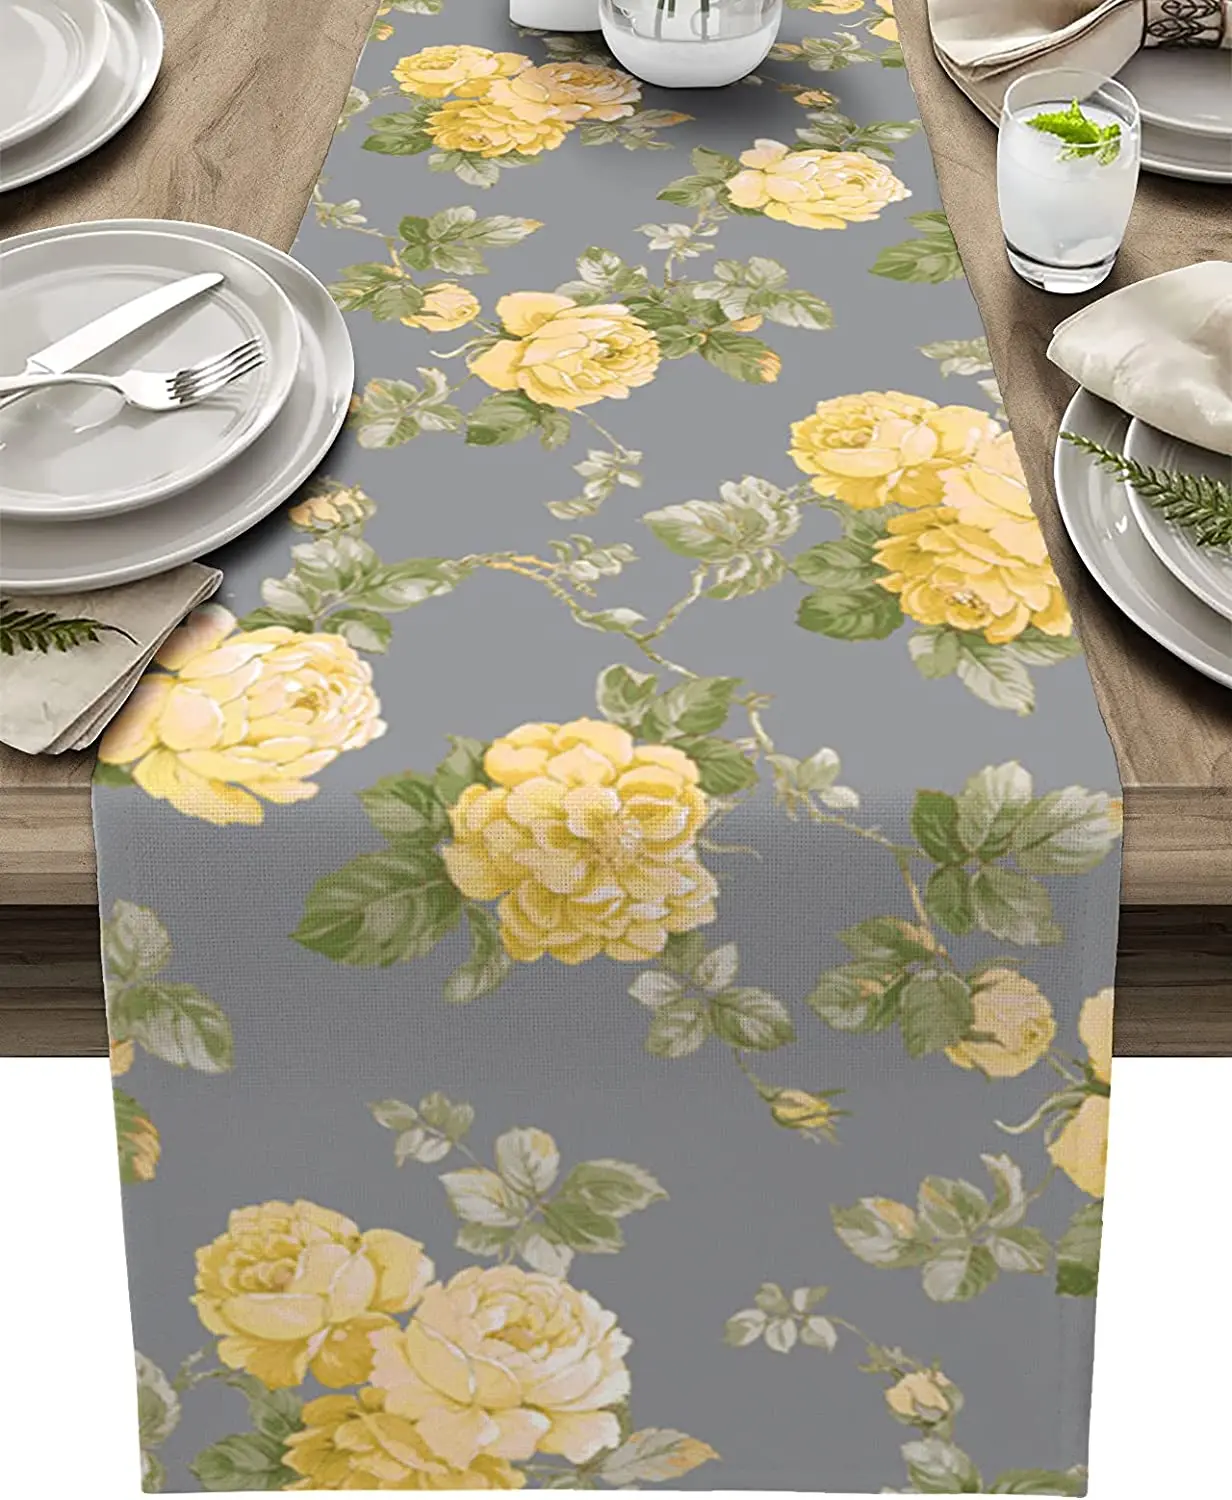 

Watercolor Yellow Roses Linen Table Runners Wedding Party Decoration Floral Gray Backdrop Table Runners Kitchen Table Decor